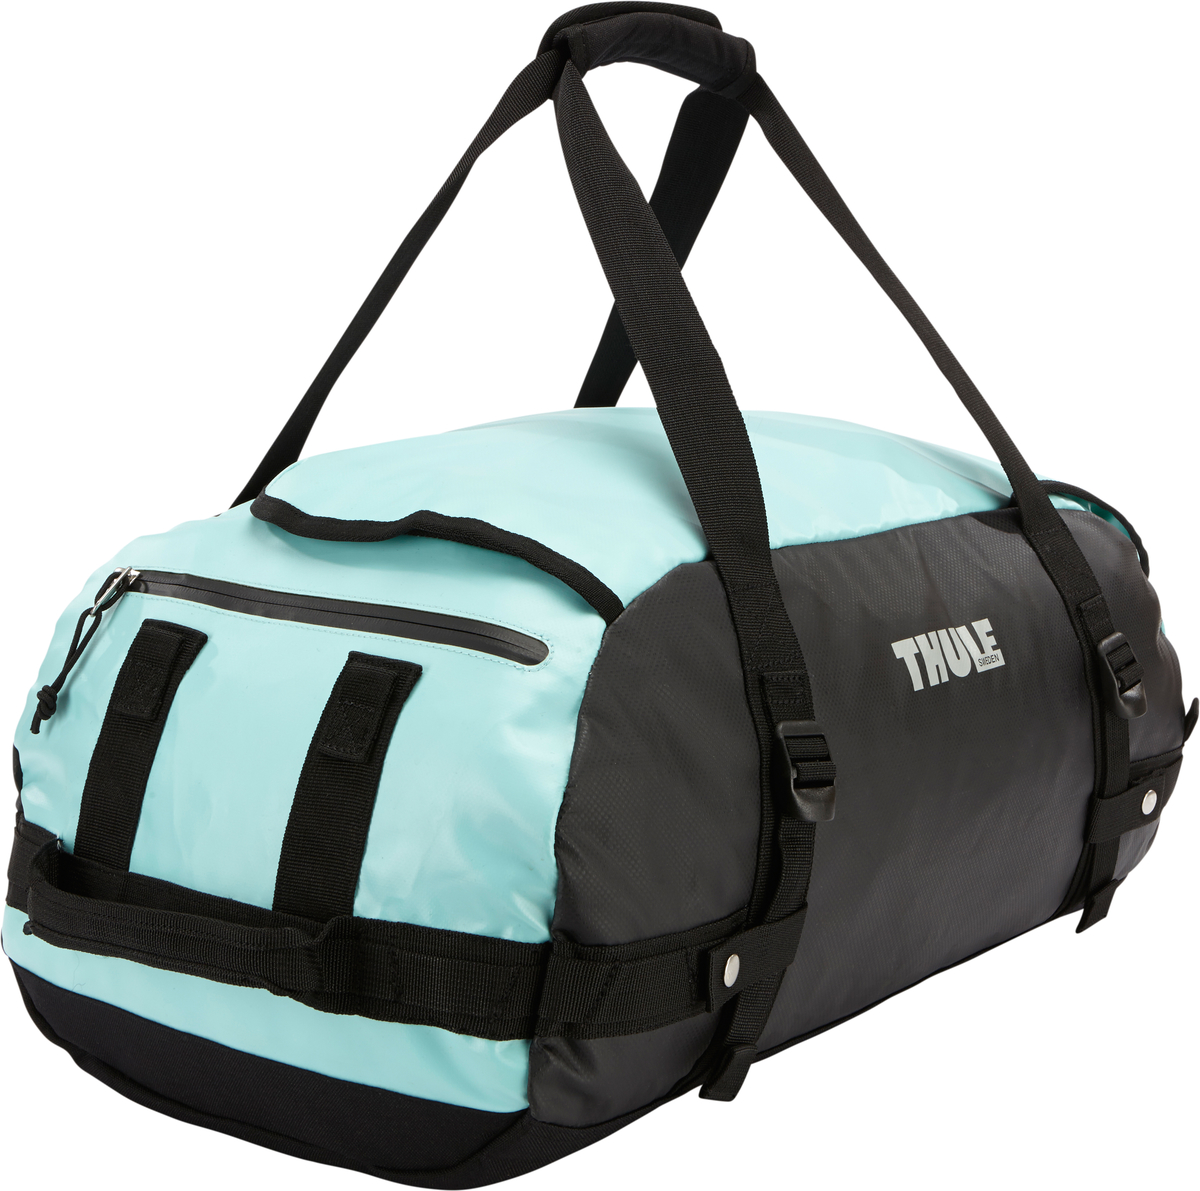  - Thule "Chasm S", : , 40